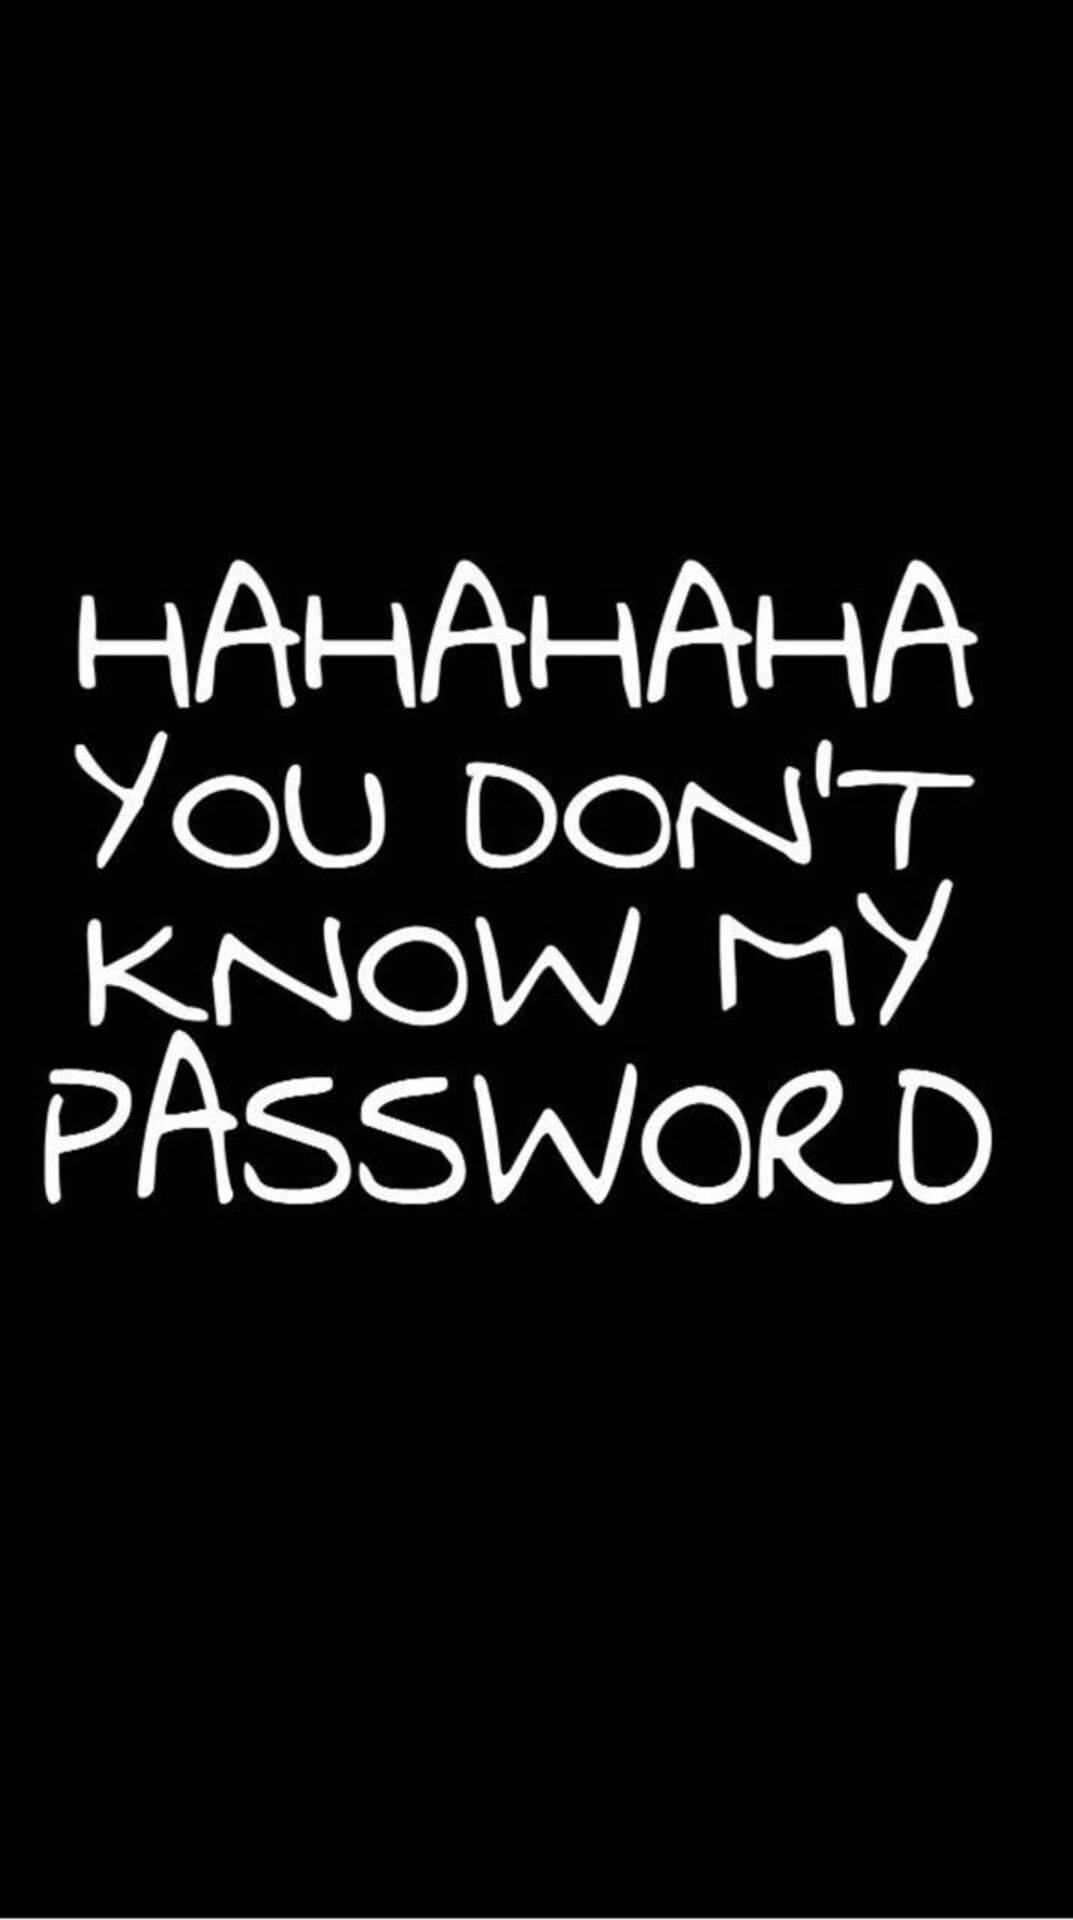 Don't Know Password Home Screen Wallpaper